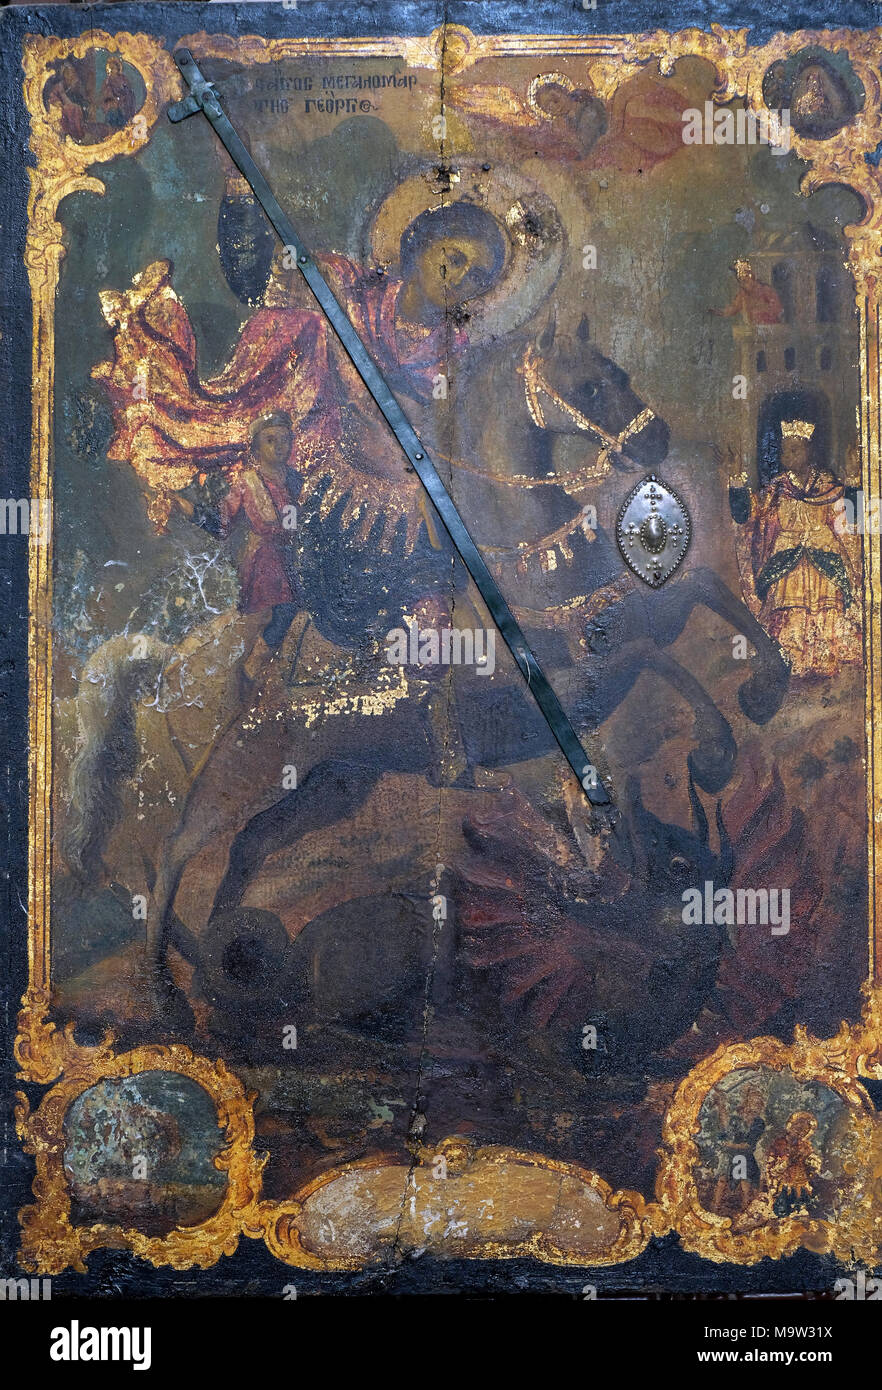 An old painting depicting an orthodox Christian legend in which Saint George slays a dragon that demanded human sacrifices placed at the Greek Orthodox Chapel of St John and baptistry in which Arab Christians pray located next to the Church of the Holy Sepulcher, on the Western wall of the square.in the Christian Quarter old city  East Jerusalem Israel Stock Photo